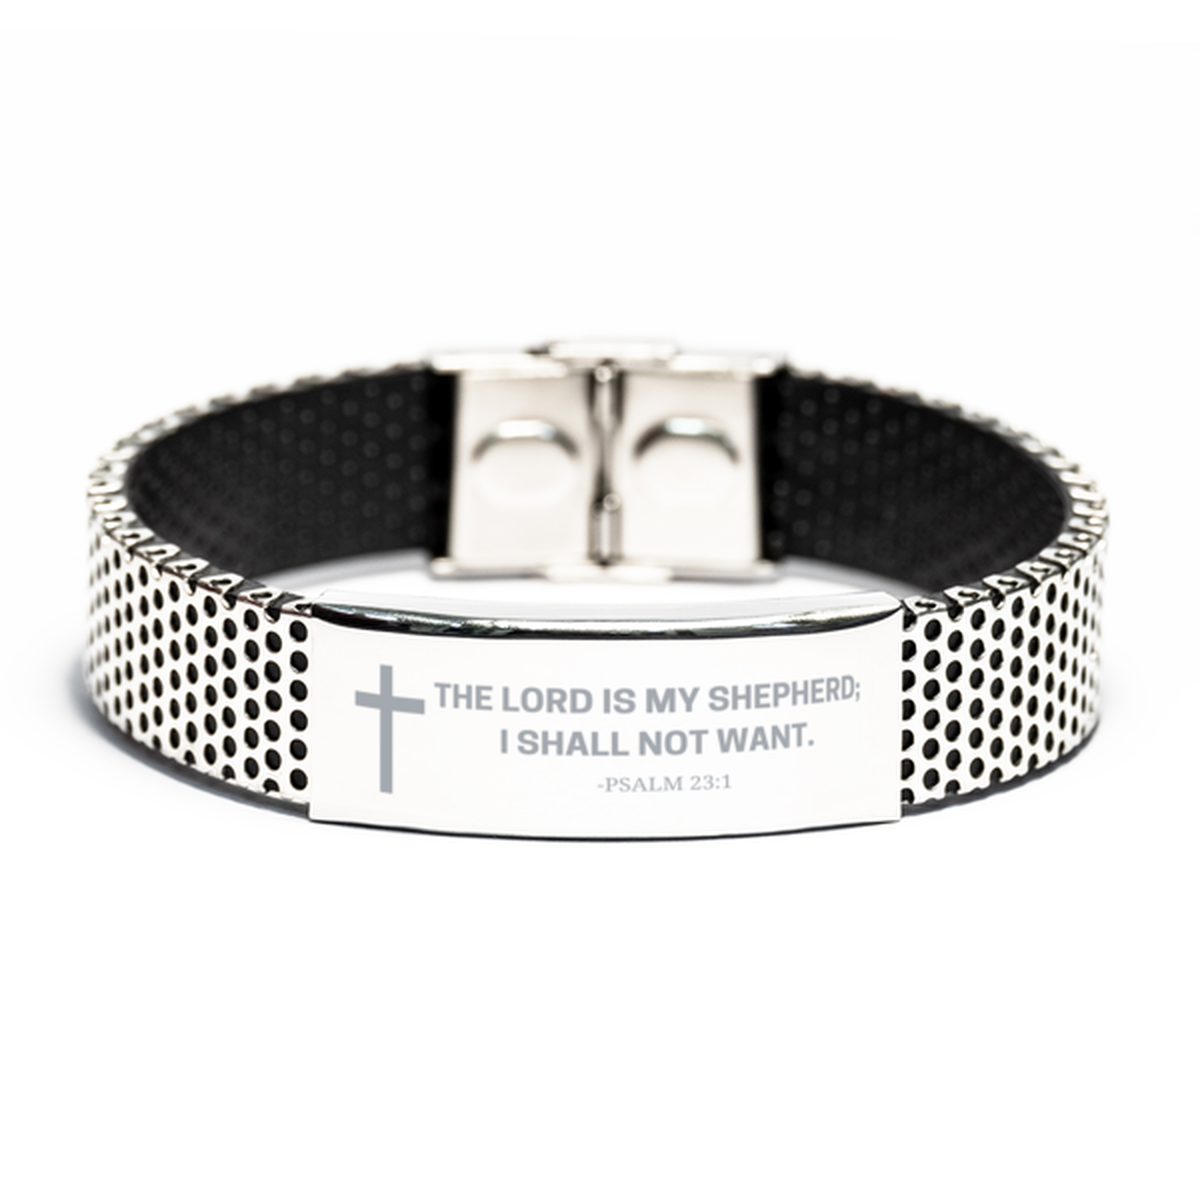 Baptism Gifts For Teenage Boys Girls, Christian Bible Verse Stainless Steel Bracelet, The Lord is my shepherd, Catholic Confirmation Gifts for Son, Godson, Grandson, Nephew